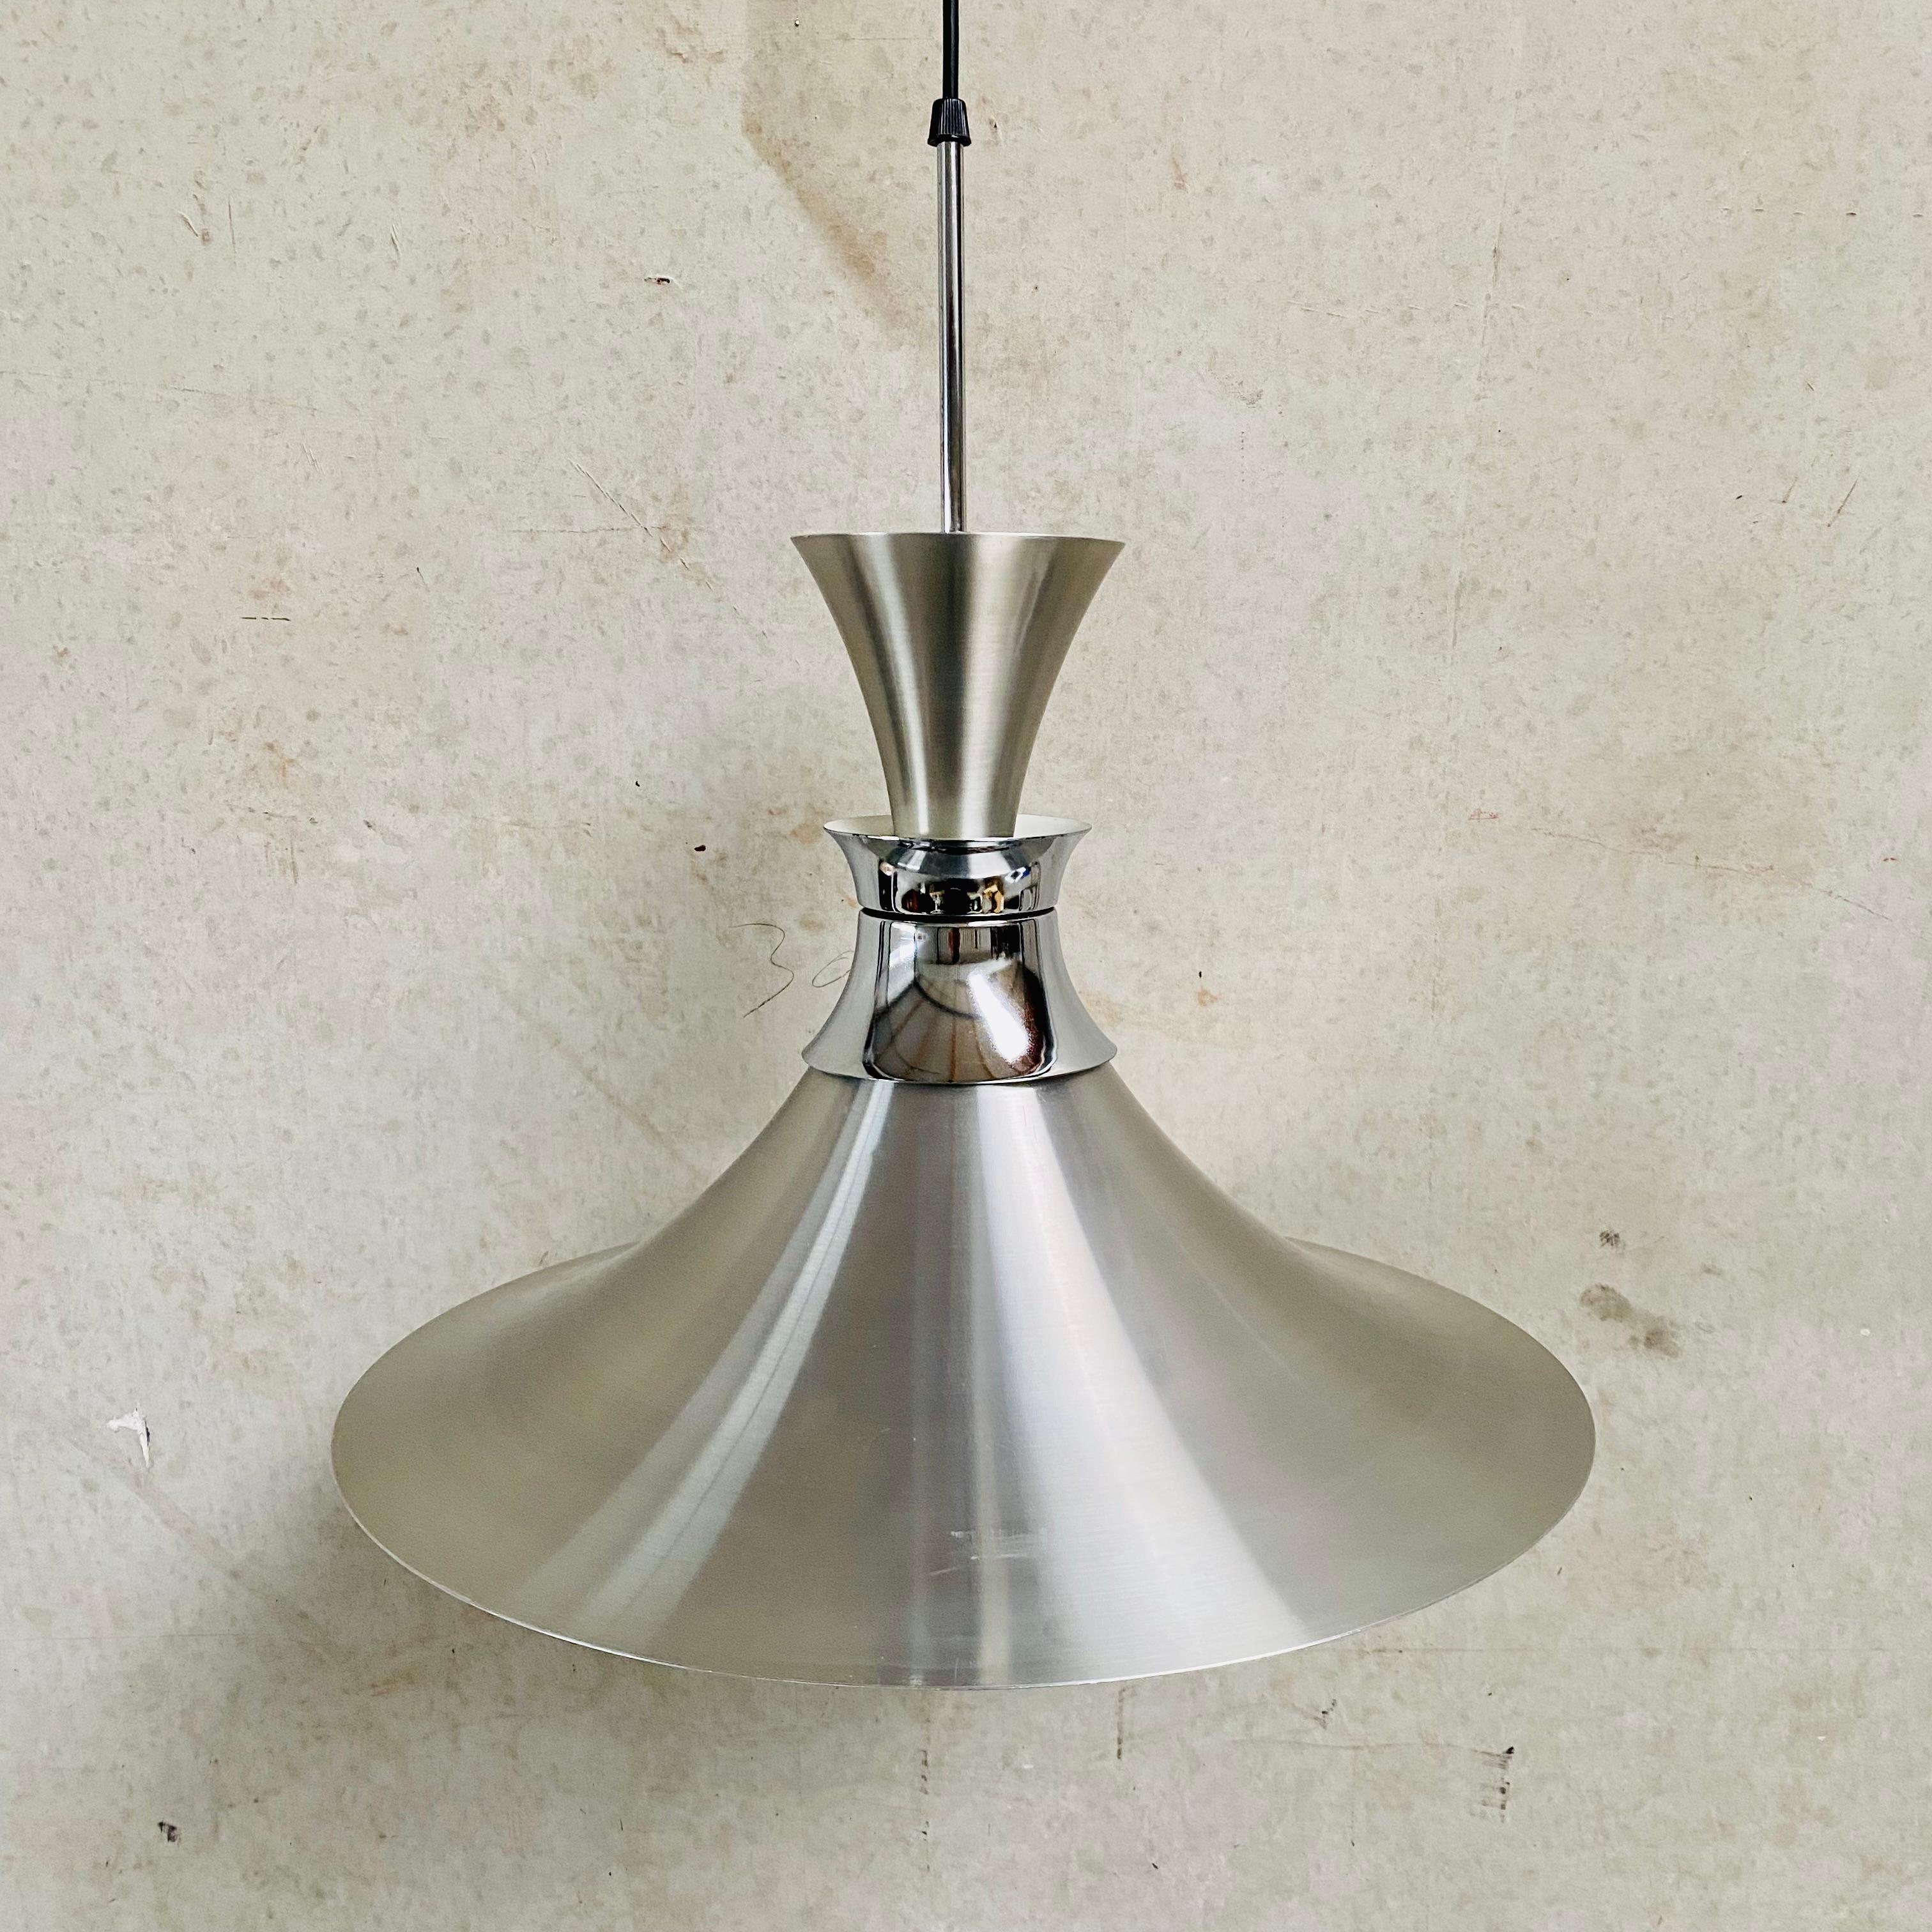 Introducing the midcentury Aluminium Pendant by Bent Nordsted for Lyskaer Denmark 1970. This remarkable pendant light embodies the essence of Scandinavian Modernist design, featuring a sleek and timeless aesthetic that effortlessly blends form and